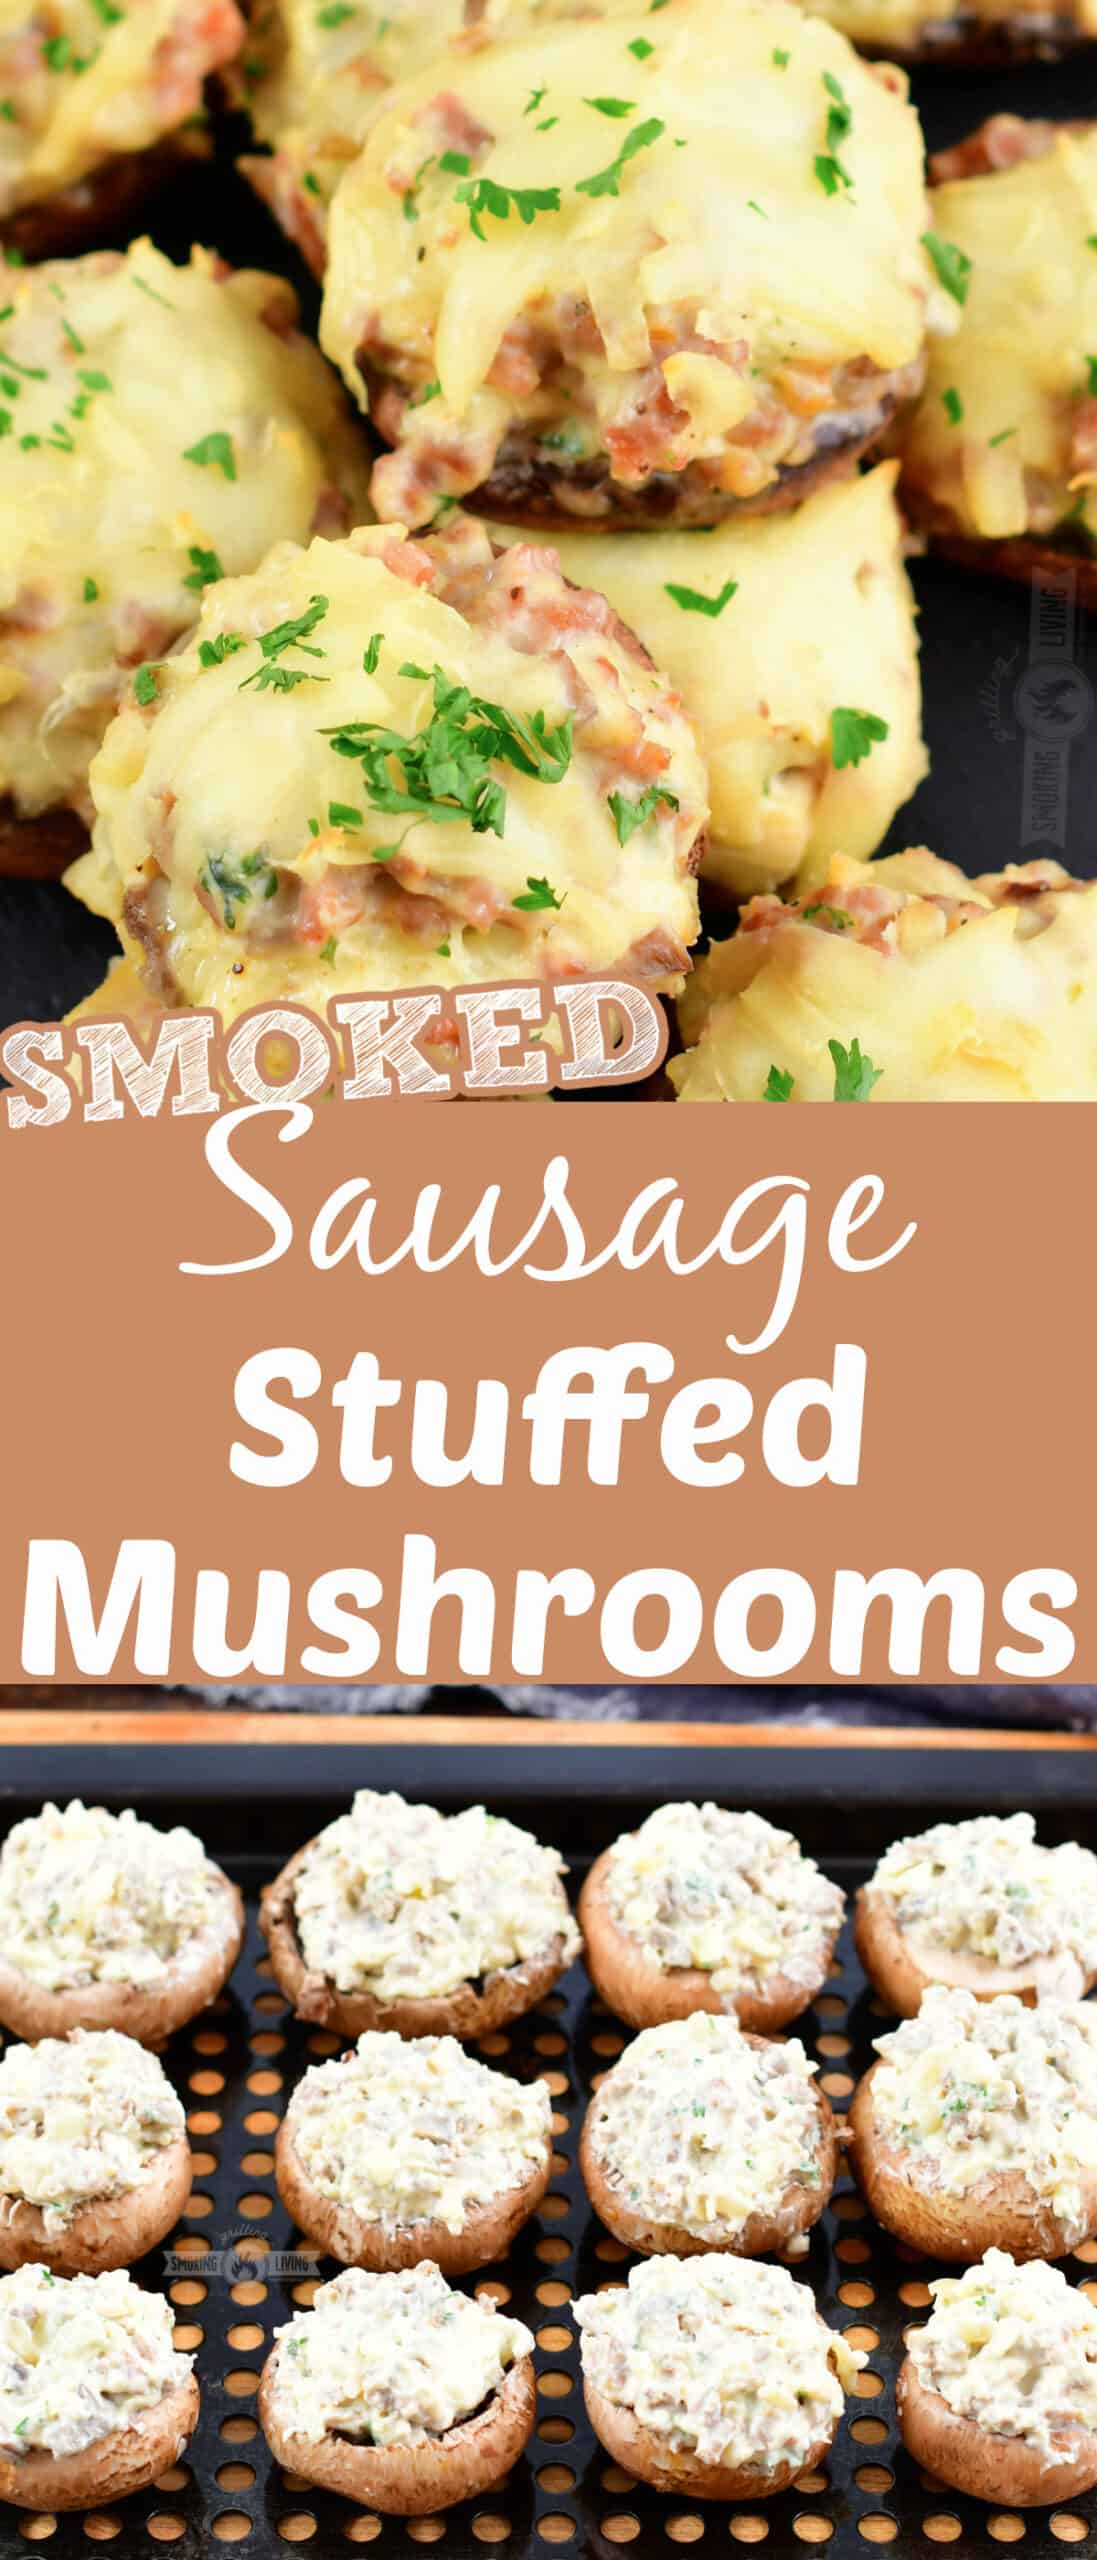 collage of two images of smoked mushrooms and stuffed mushrooms